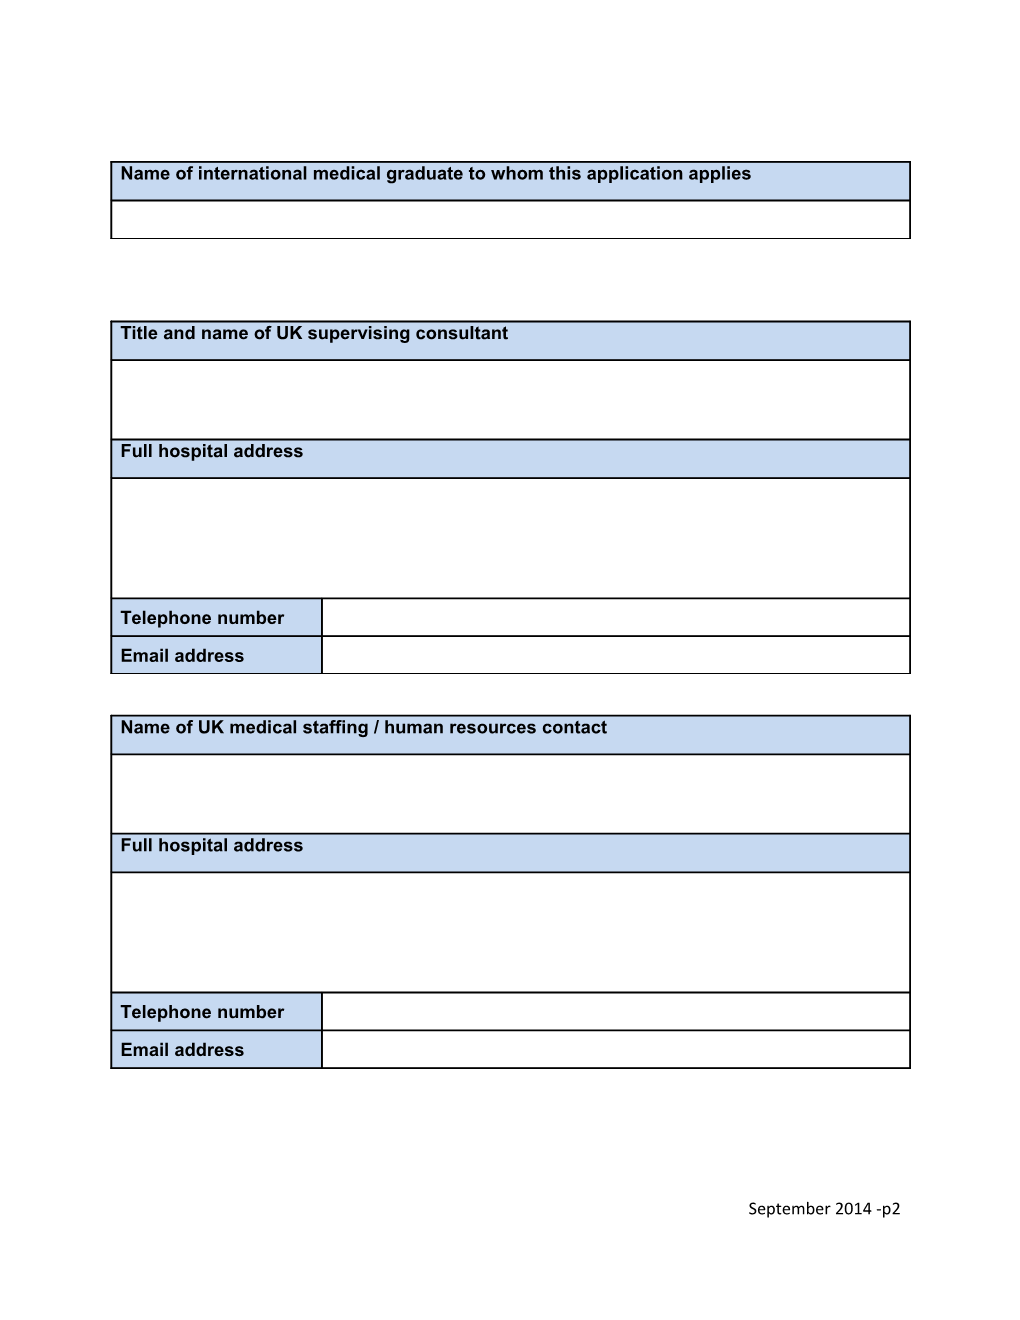 CR ISS Supervising Consultant Form